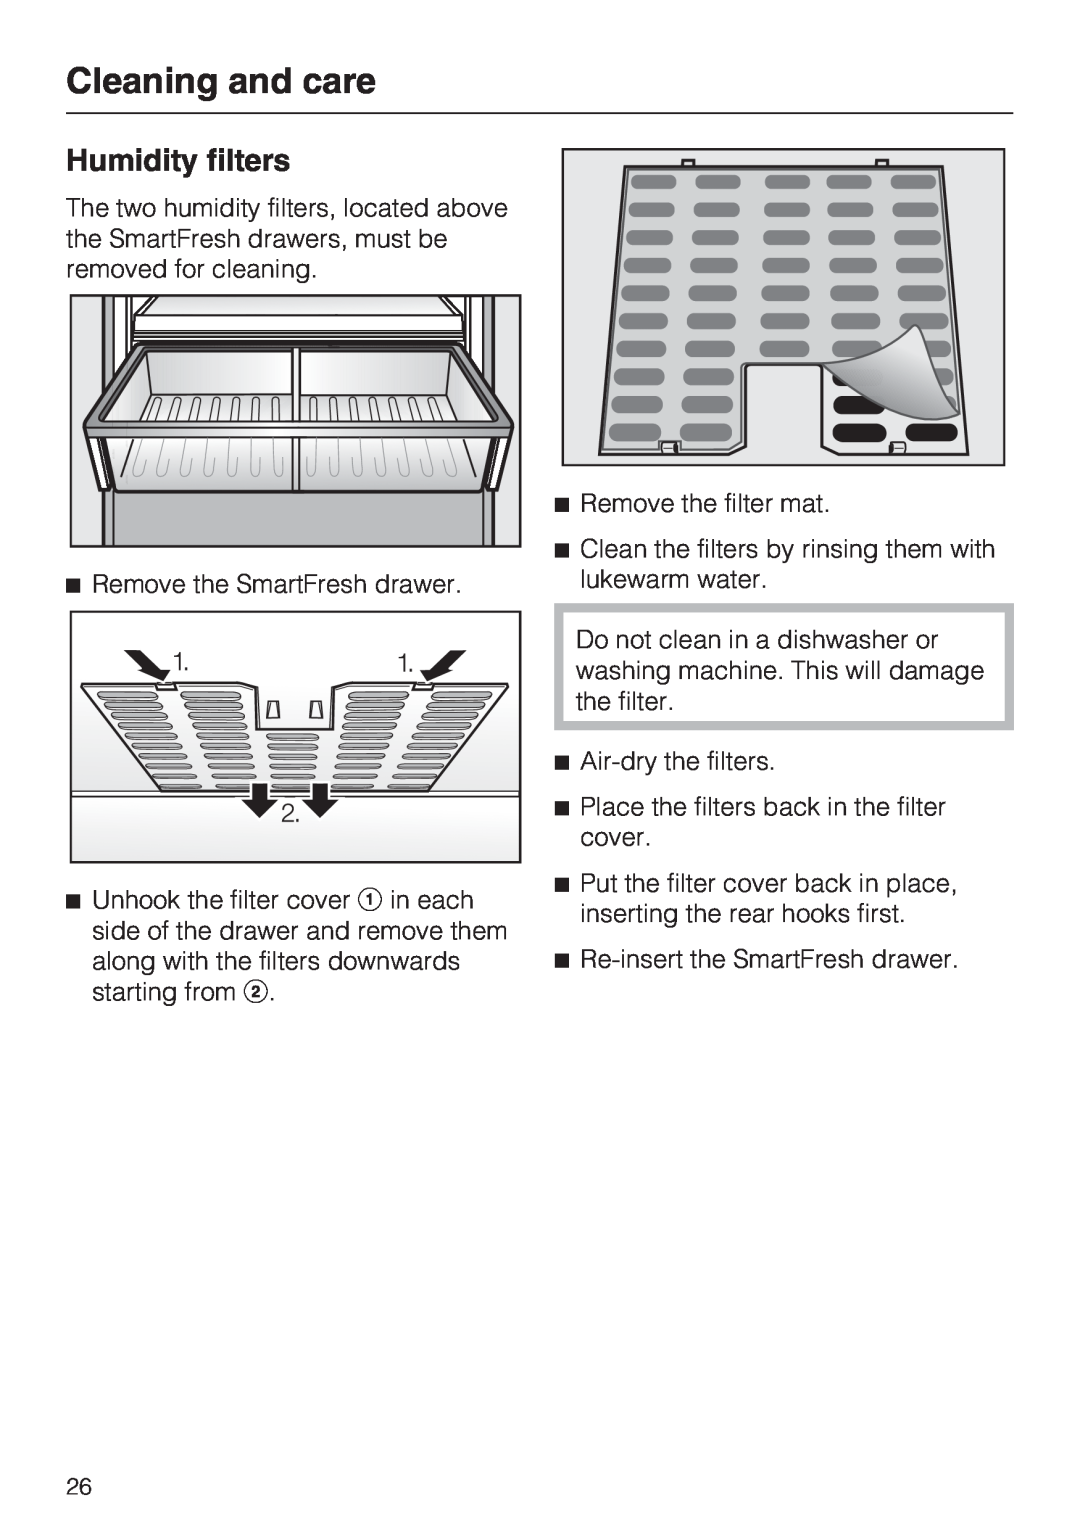 Miele K 1901 SF, K 1911 SF, K 1801 SF, K 1811 SF installation instructions Humidity filters, Cleaning and care 